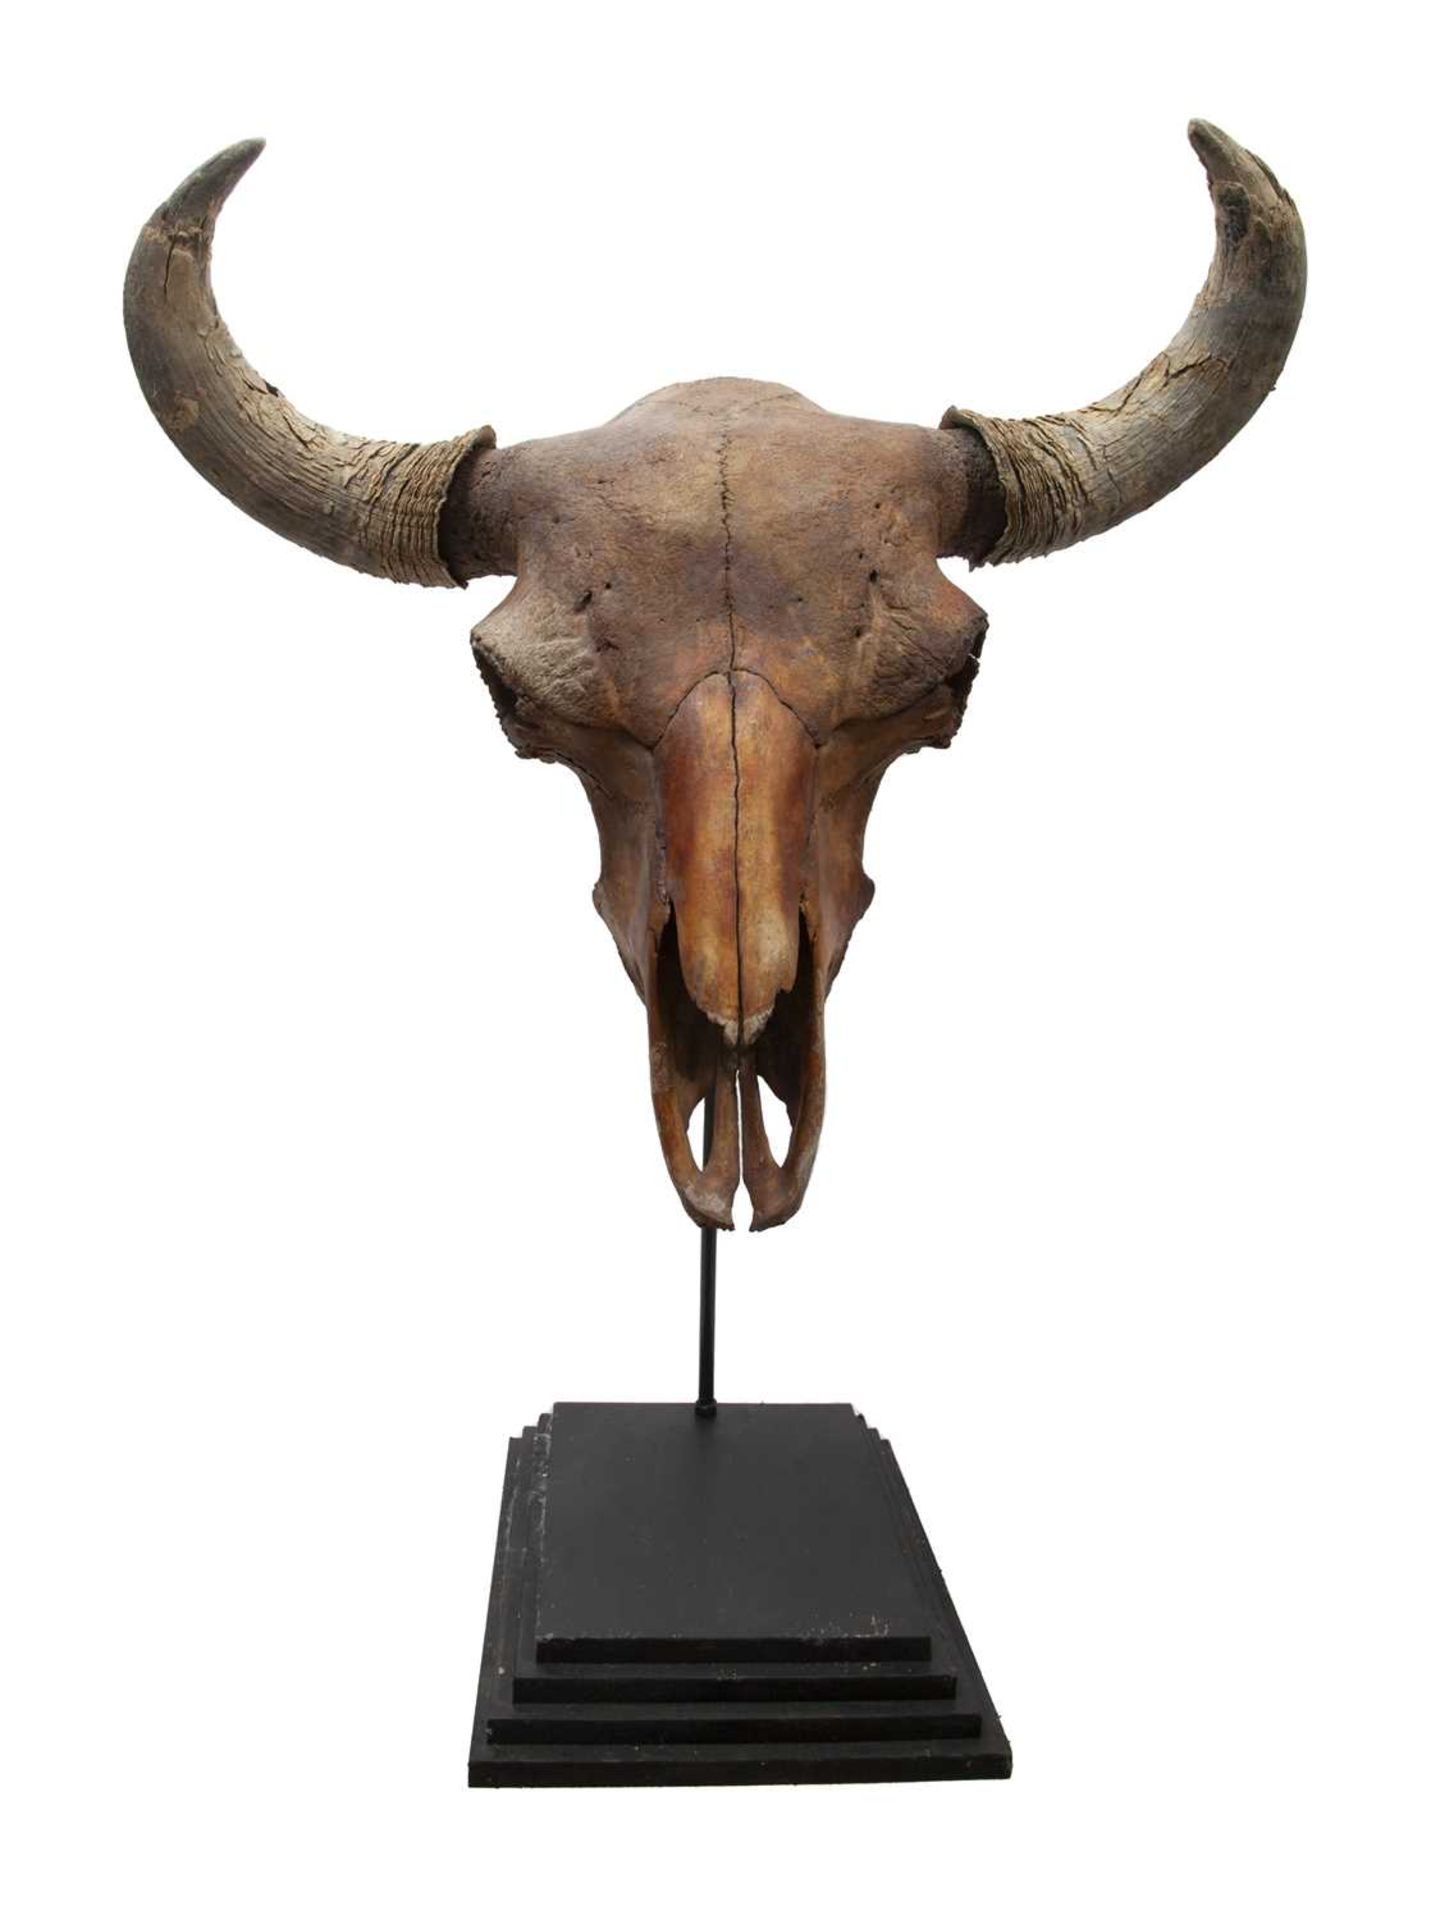 A RARE FOSSILISED SKULL OF AN EXTINCT STEPPE BISON, AT LEAST 10,000 YEARS OLD - Image 3 of 4